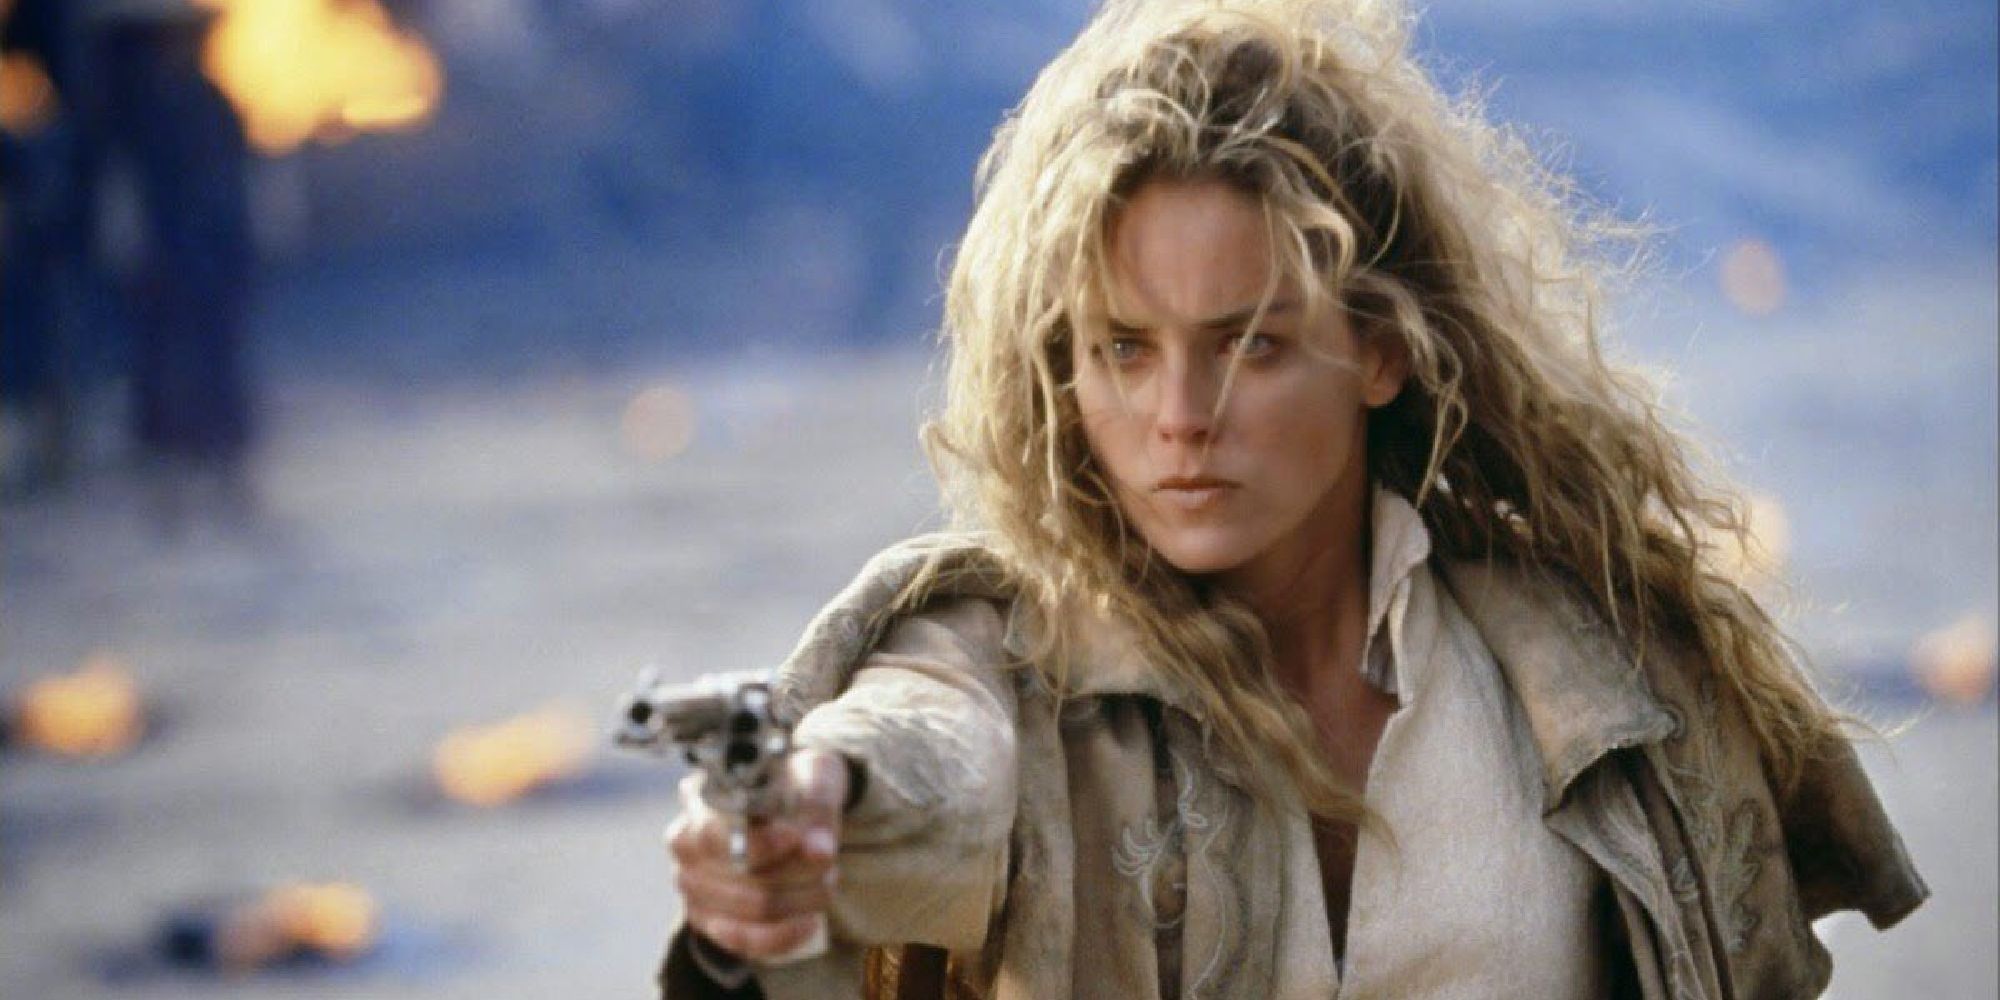 Sharon Stone as Ellen in 1995's The Fast and the Dead